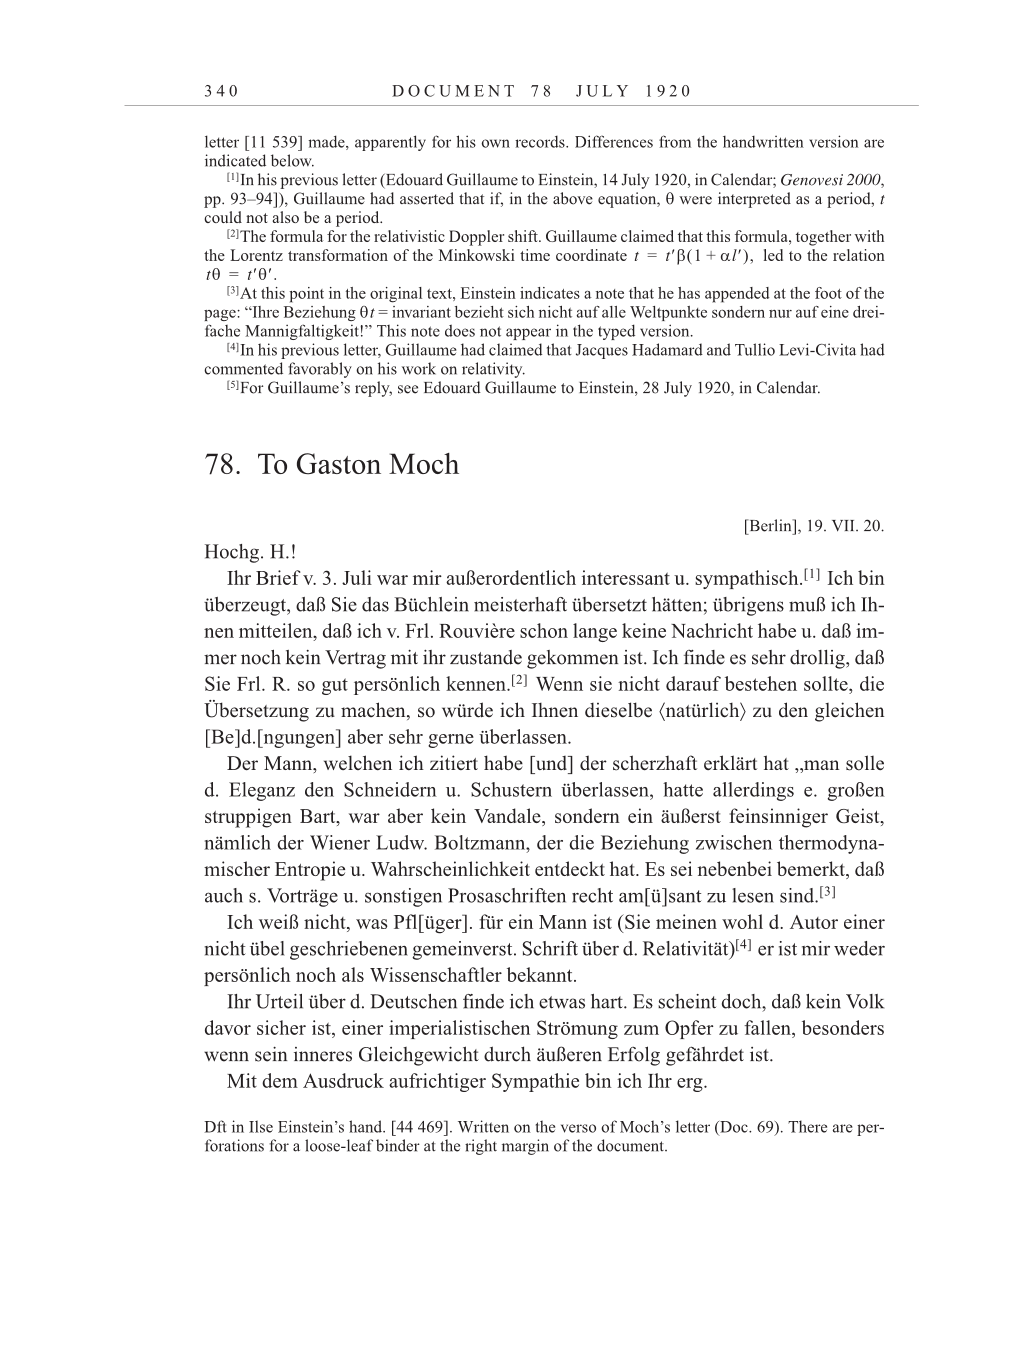 Volume 10: The Berlin Years: Correspondence May-December 1920 / Supplementary Correspondence 1909-1920 page 340